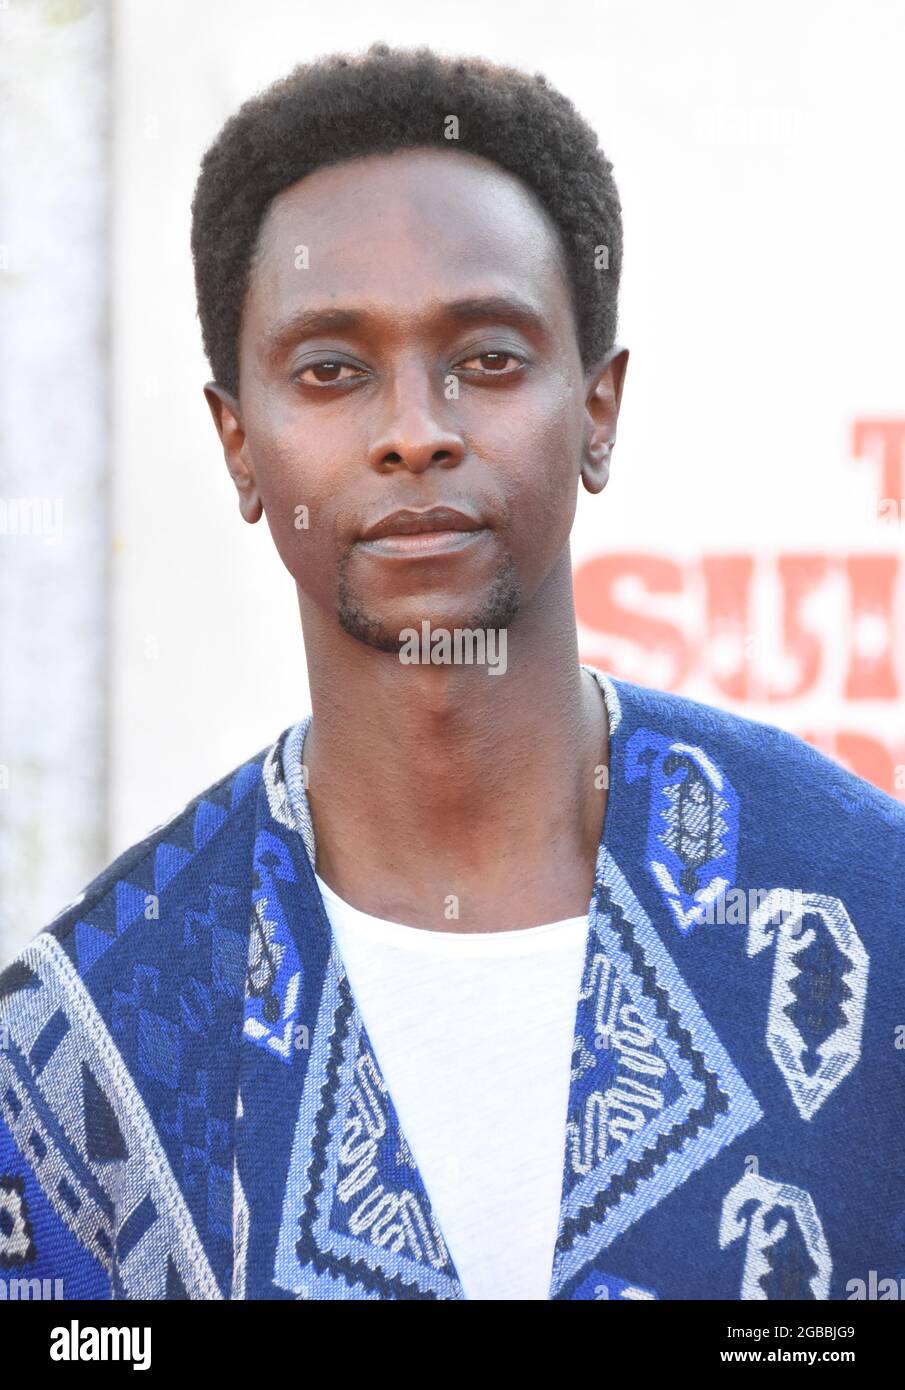 Los Angeles, California, USA 2nd August 2021 Actor Edi Gathegi attends Warner Bros. Premiere of 'The Suicide Squad' at Regency Village Theatre on August 2, 2021 in Los Angeles, California, USA. Photo by Barry King/Alamy Live News Stock Photo